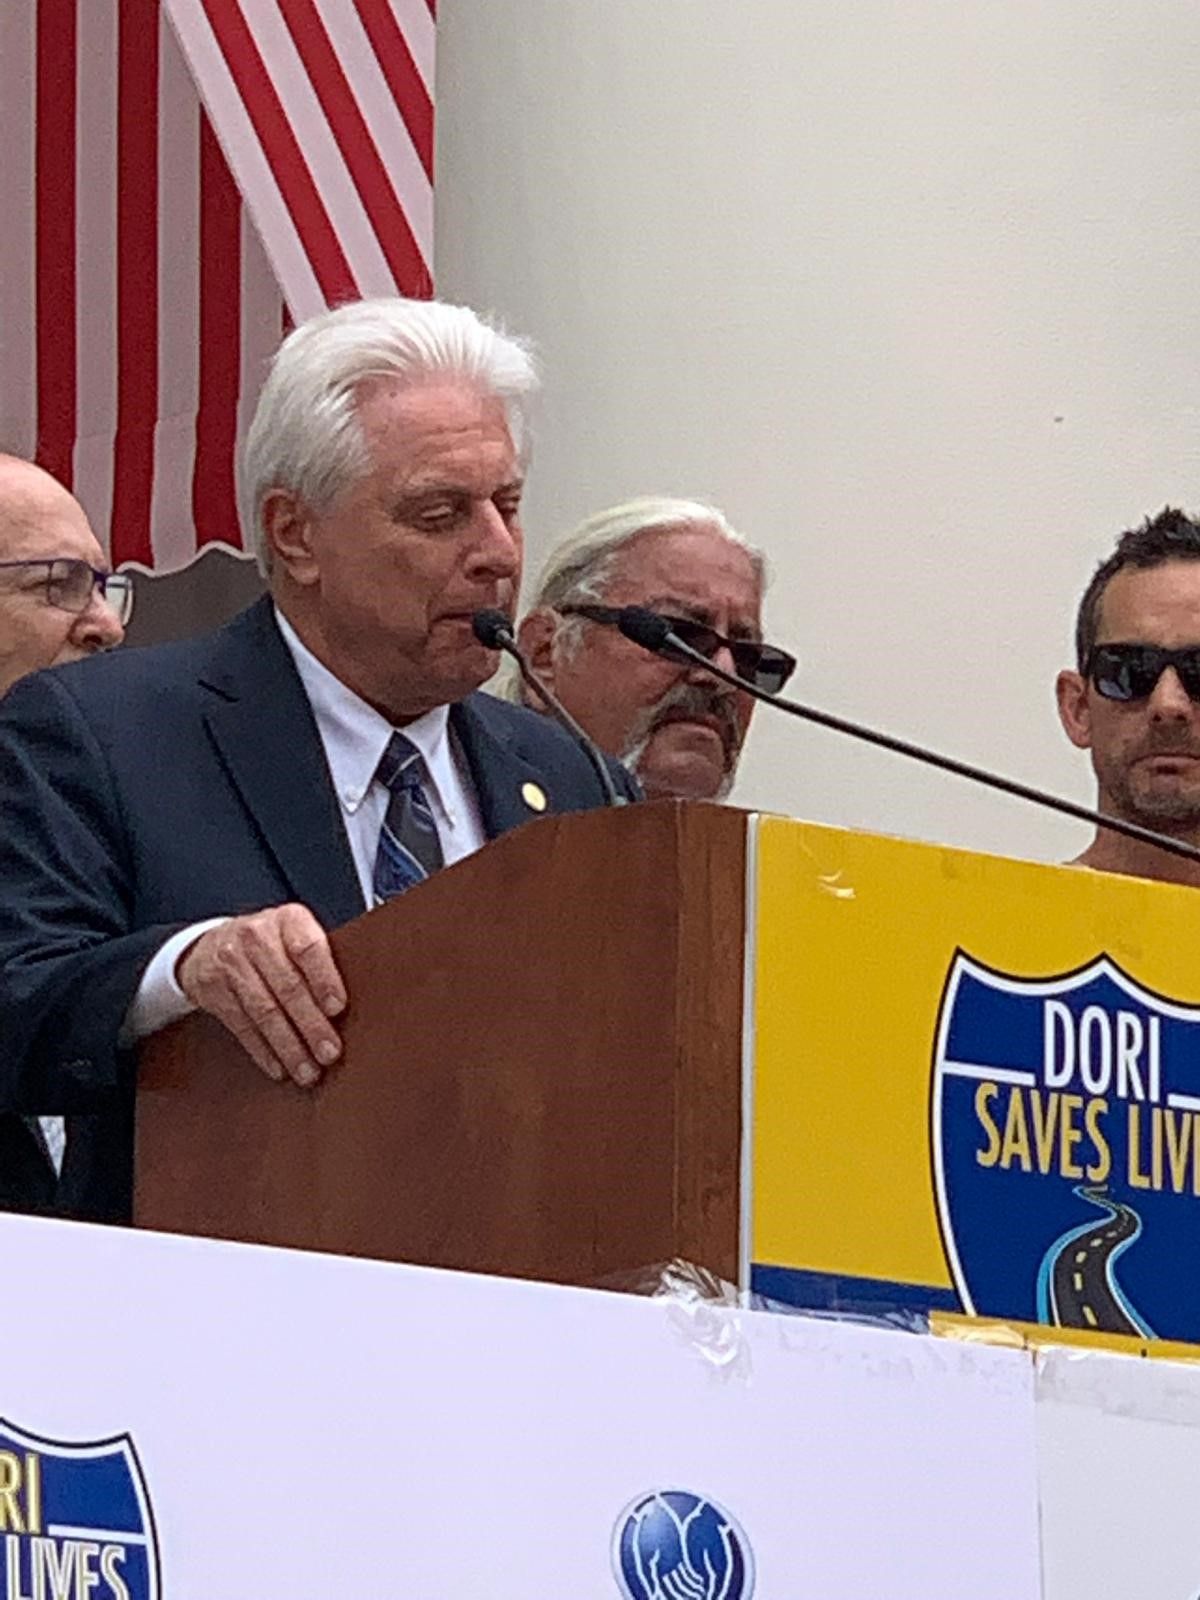 road safety day at the capitol 2019 3